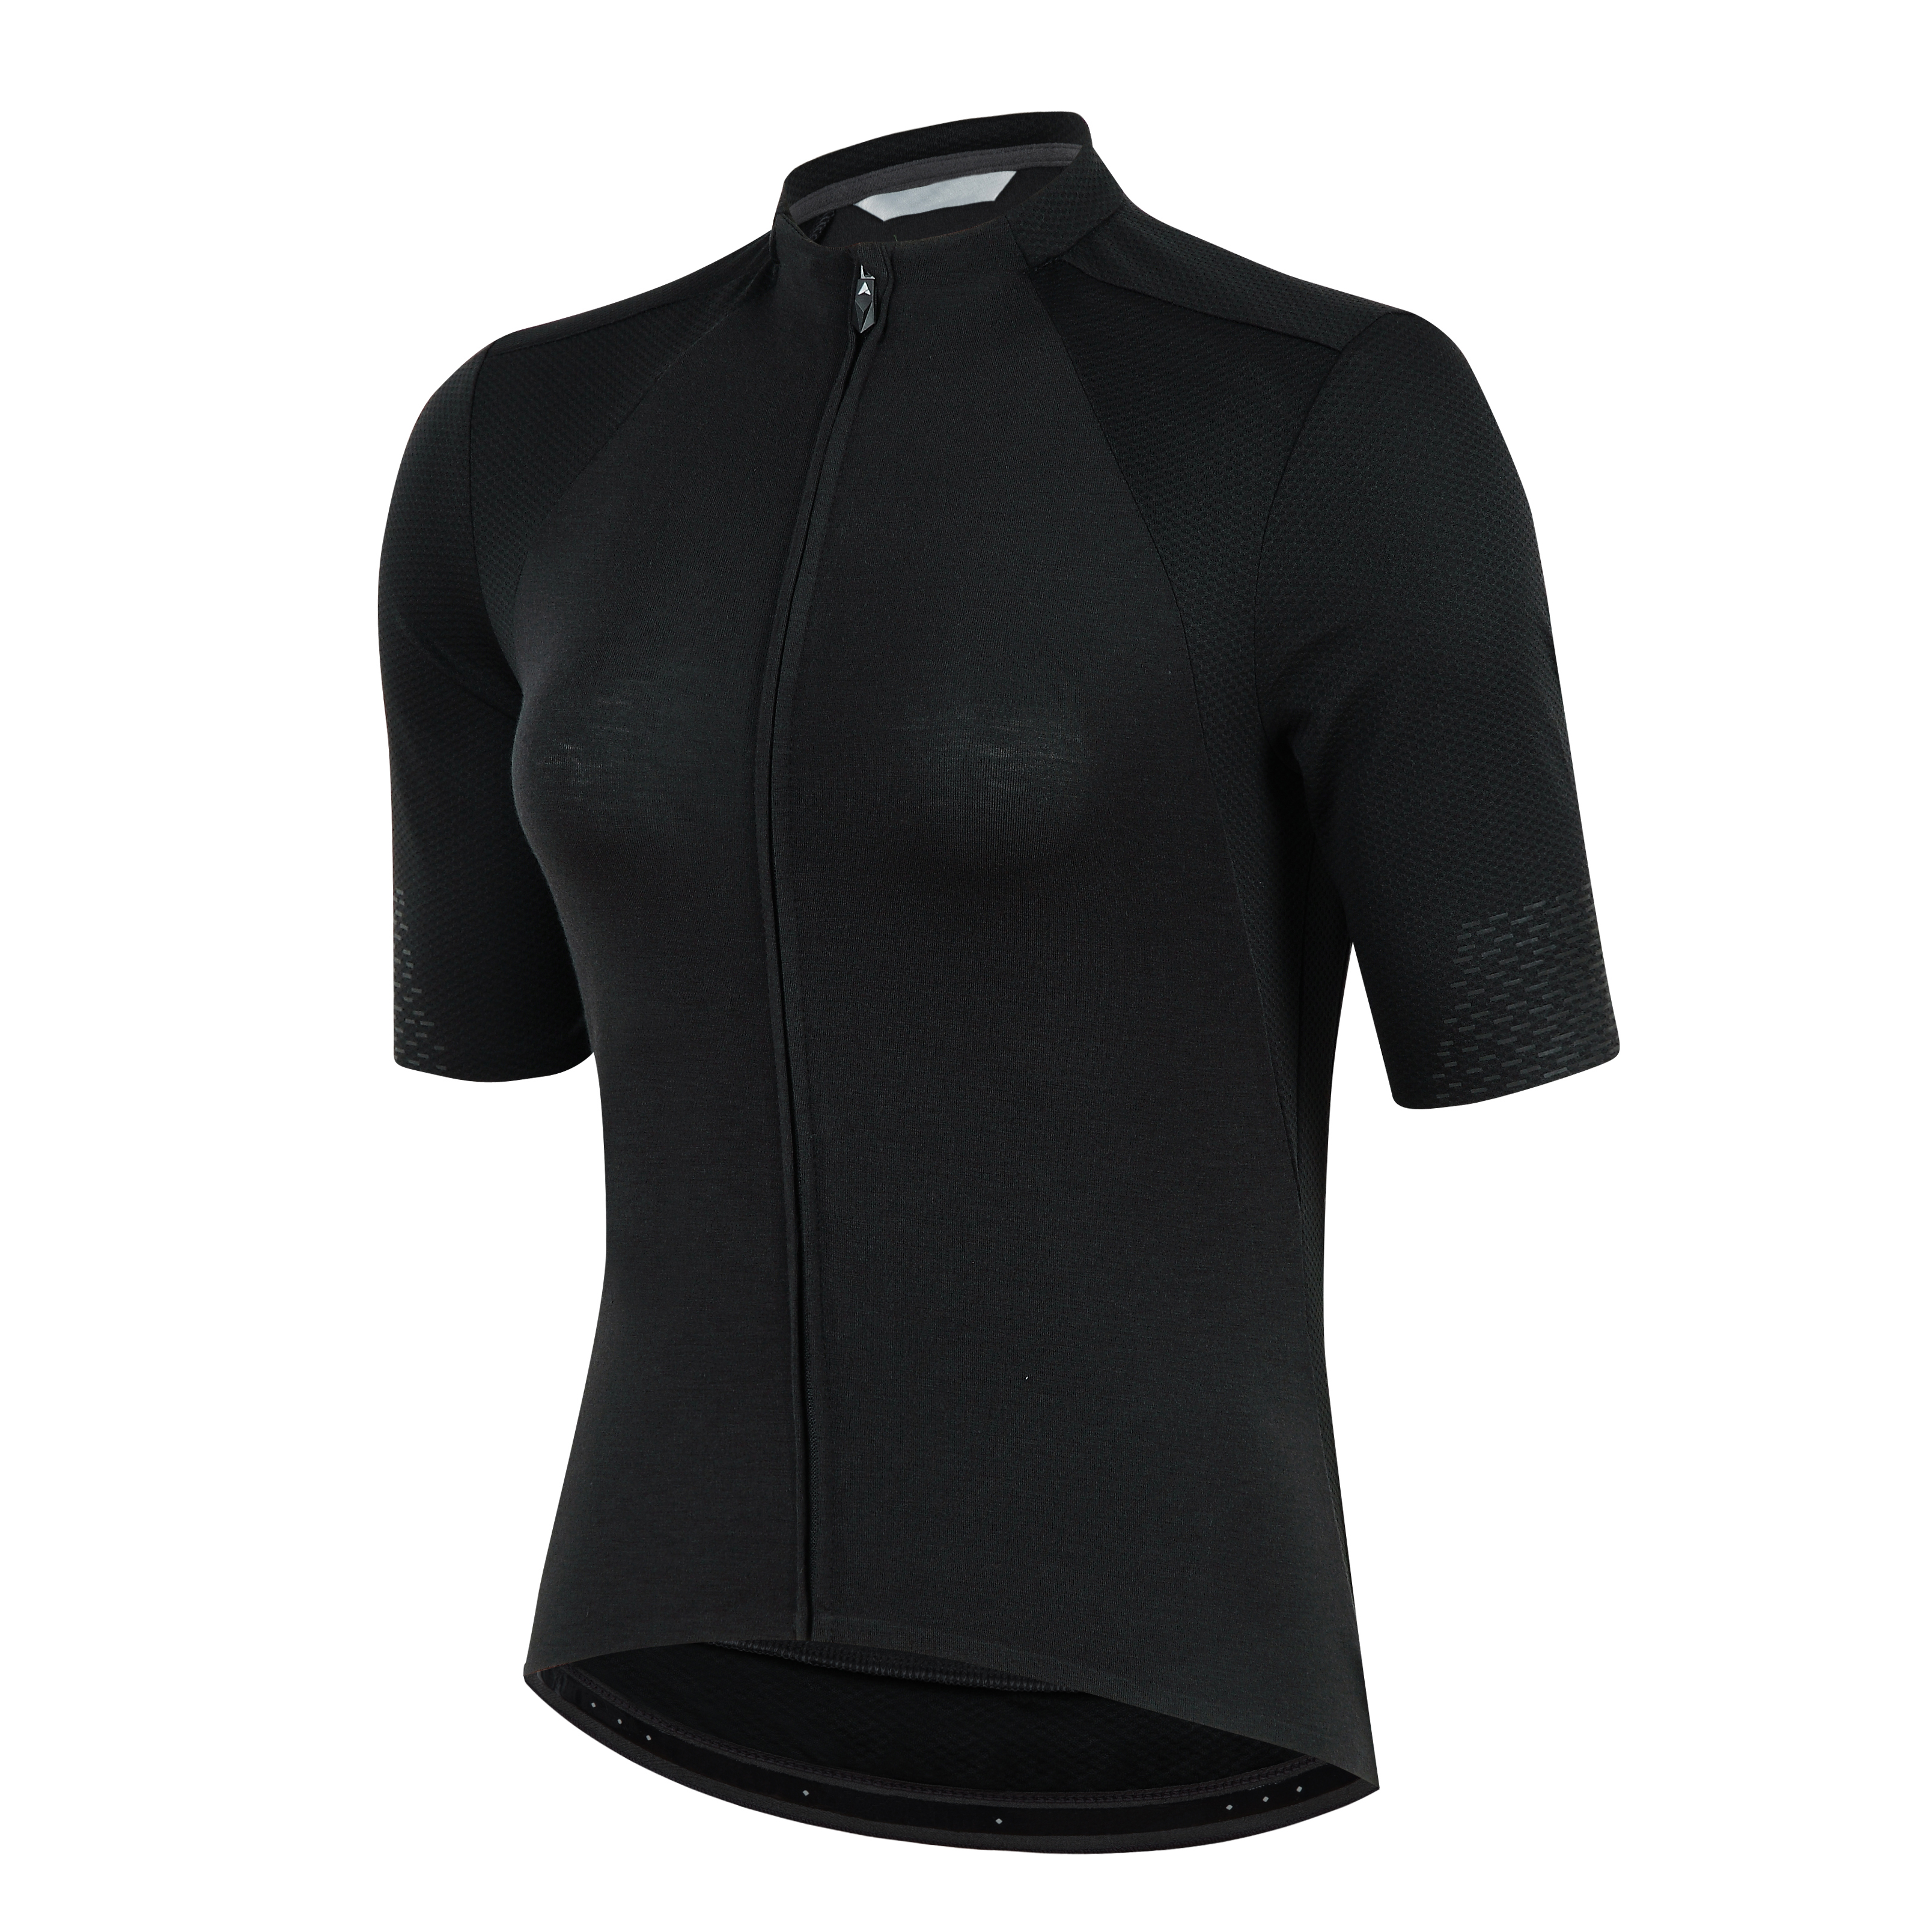 Woen’s knitted bicycle short sleeve quick dry shirt